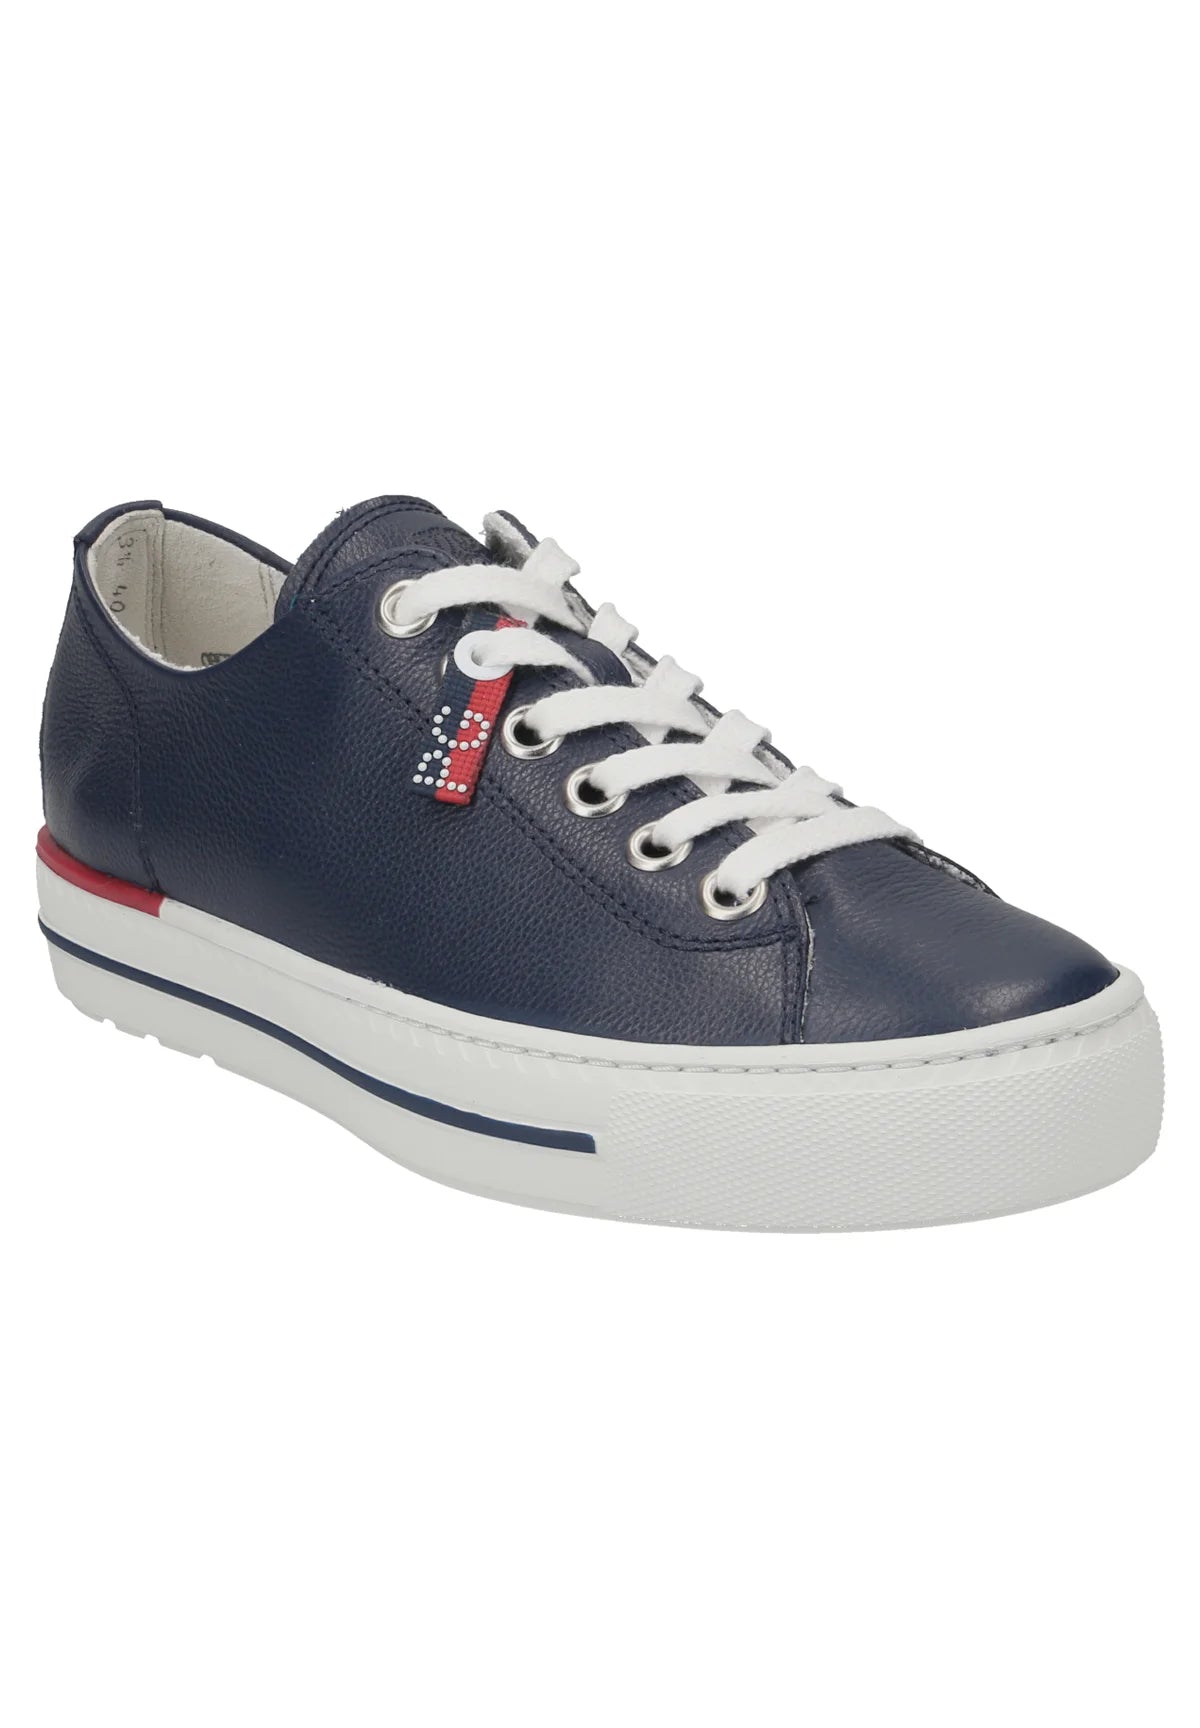 Paul Green -4760 Navy Nautical Leather Trainer